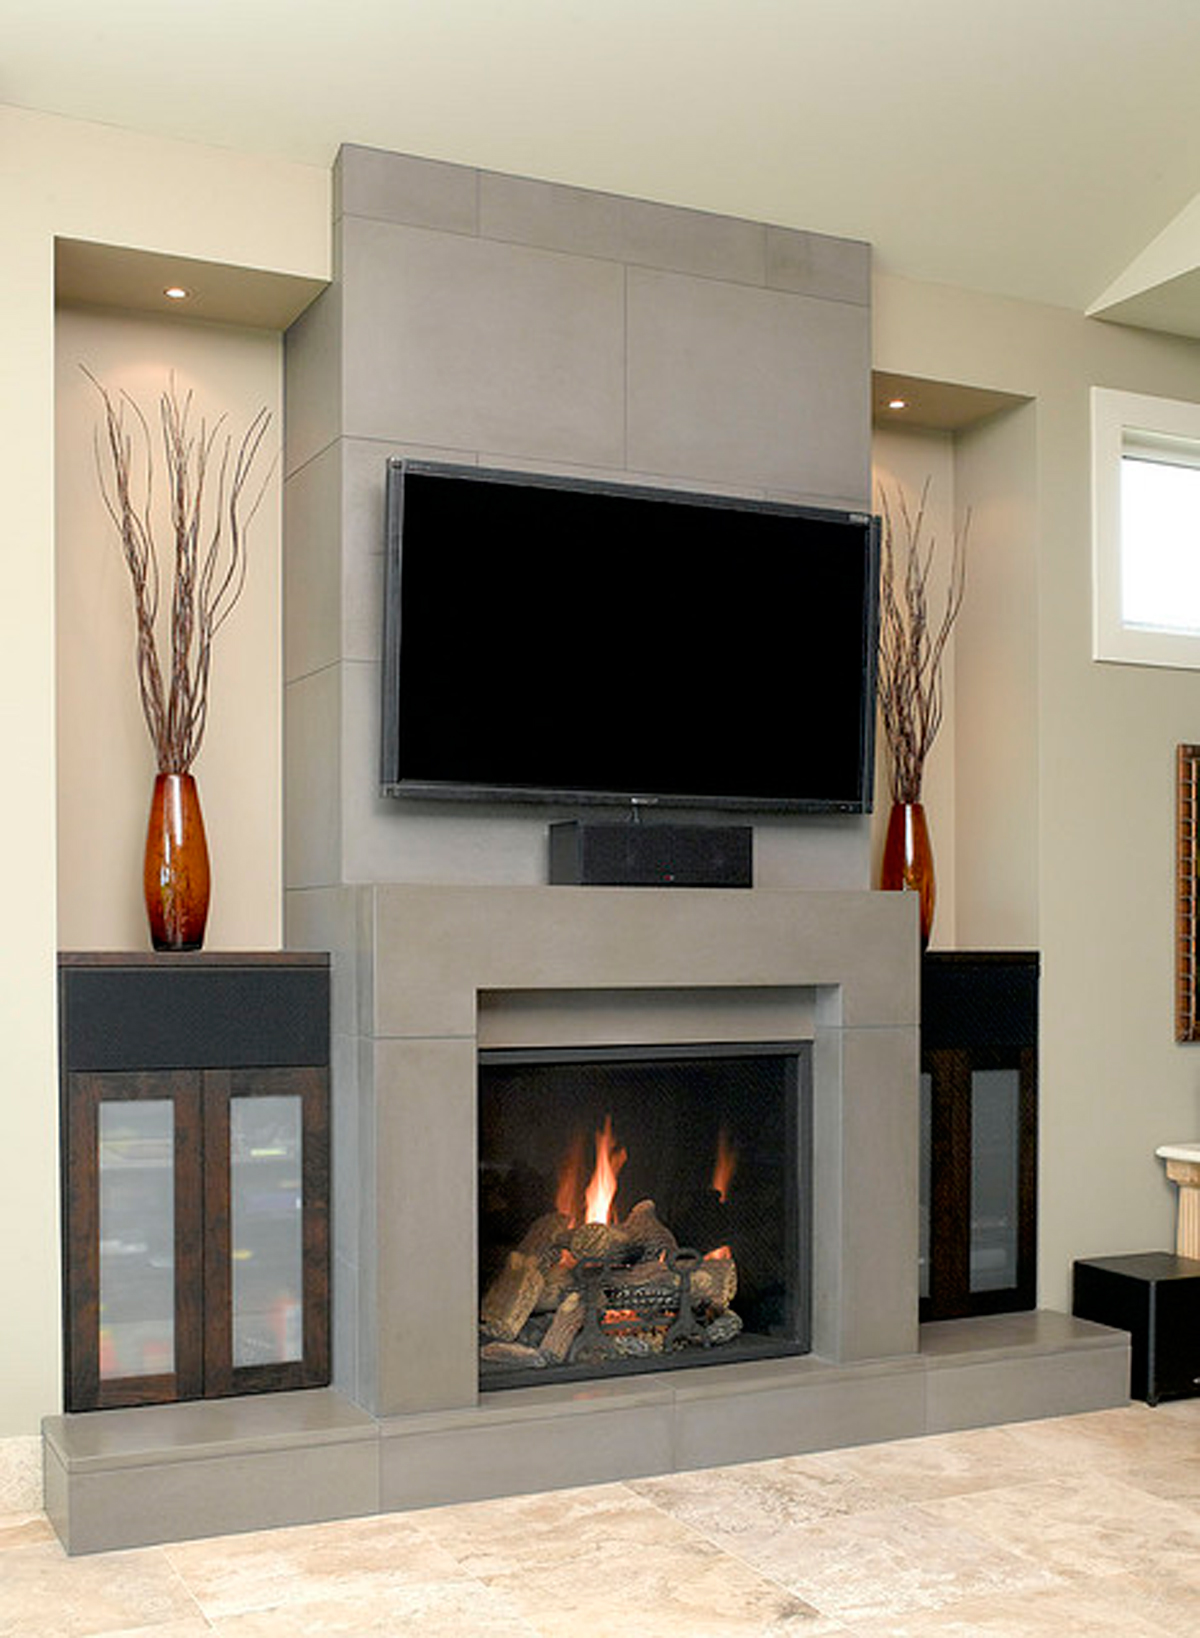 Fireplace Design Ideas in the Sophisticated House | Ideas ...